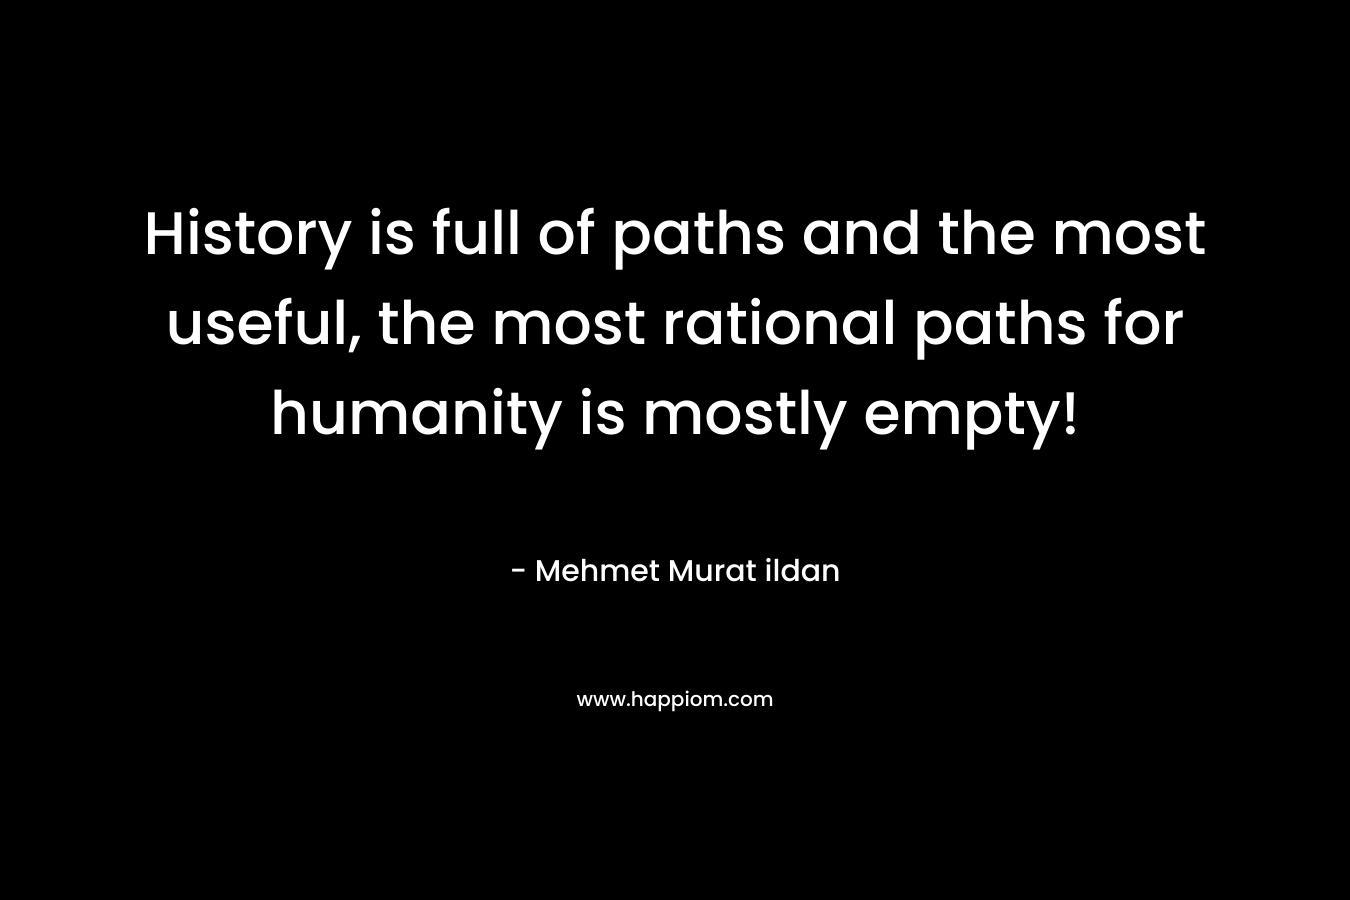 History is full of paths and the most useful, the most rational paths for humanity is mostly empty!